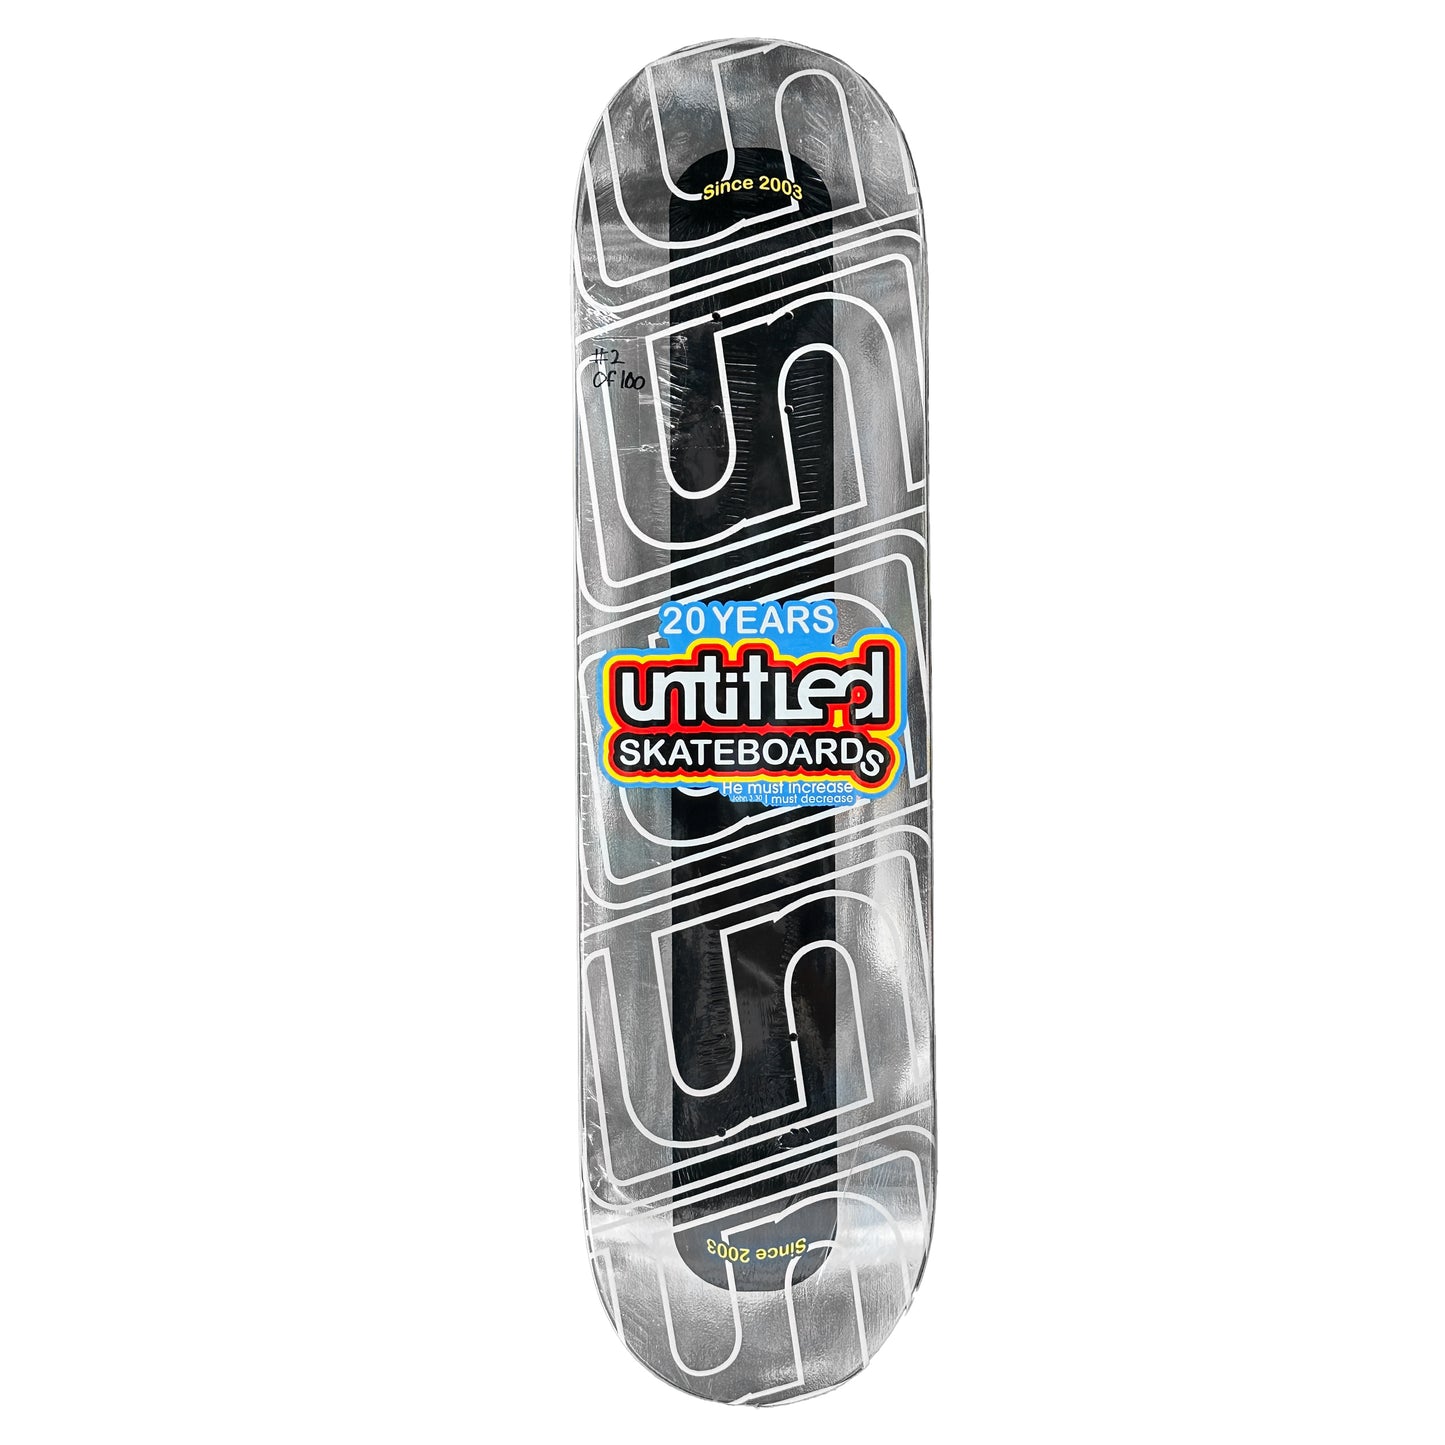 Untitled Skateboards 20 Year "Limited Edition" Board